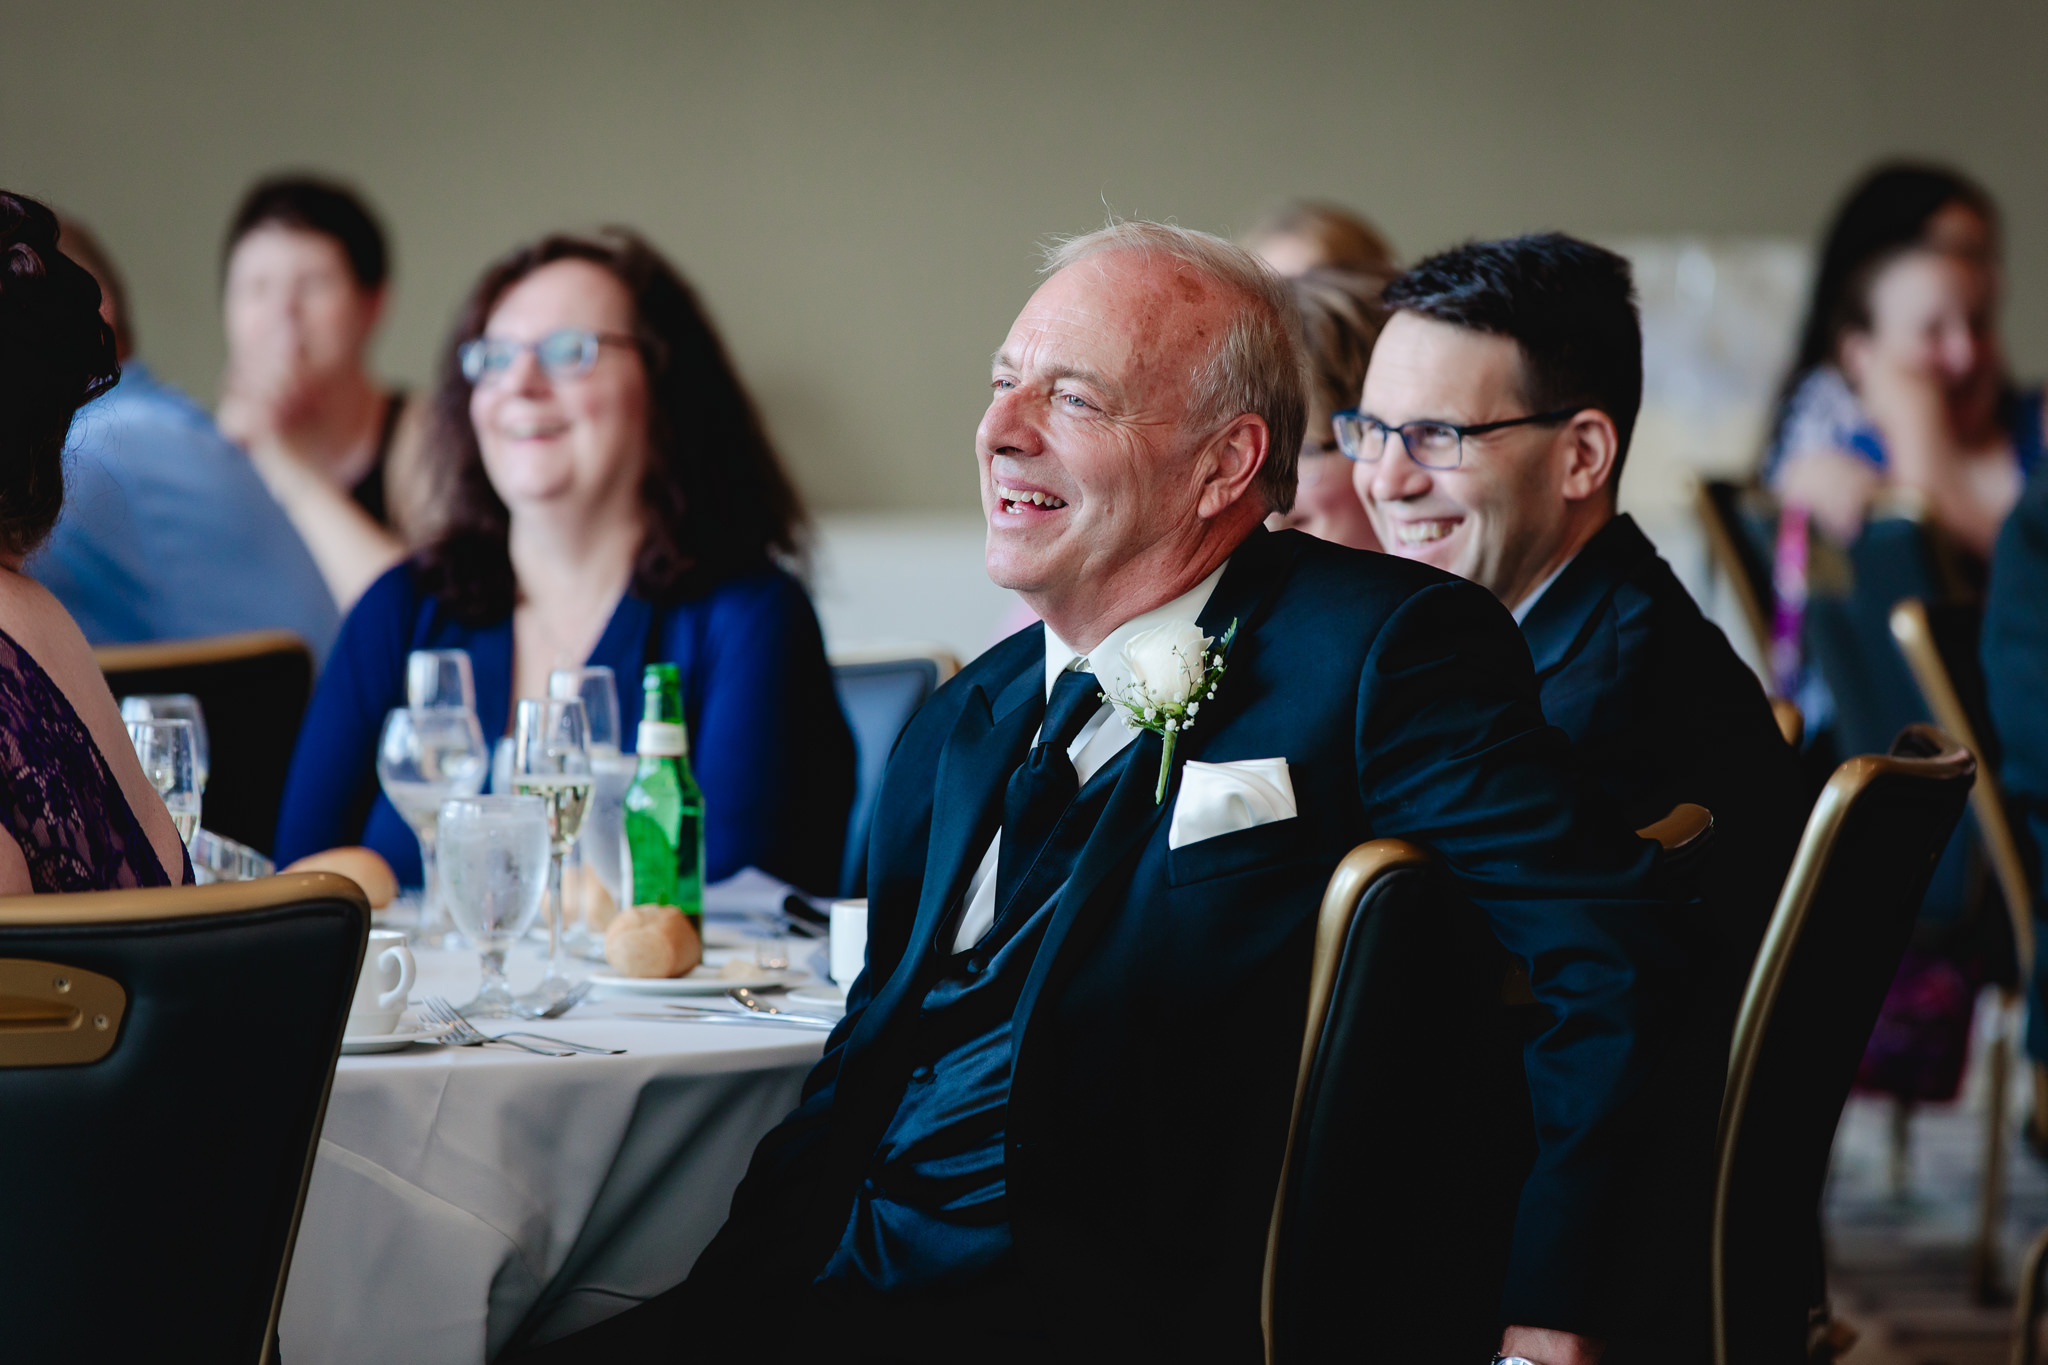 Father of the bride laughs during speeches at Duquesne University